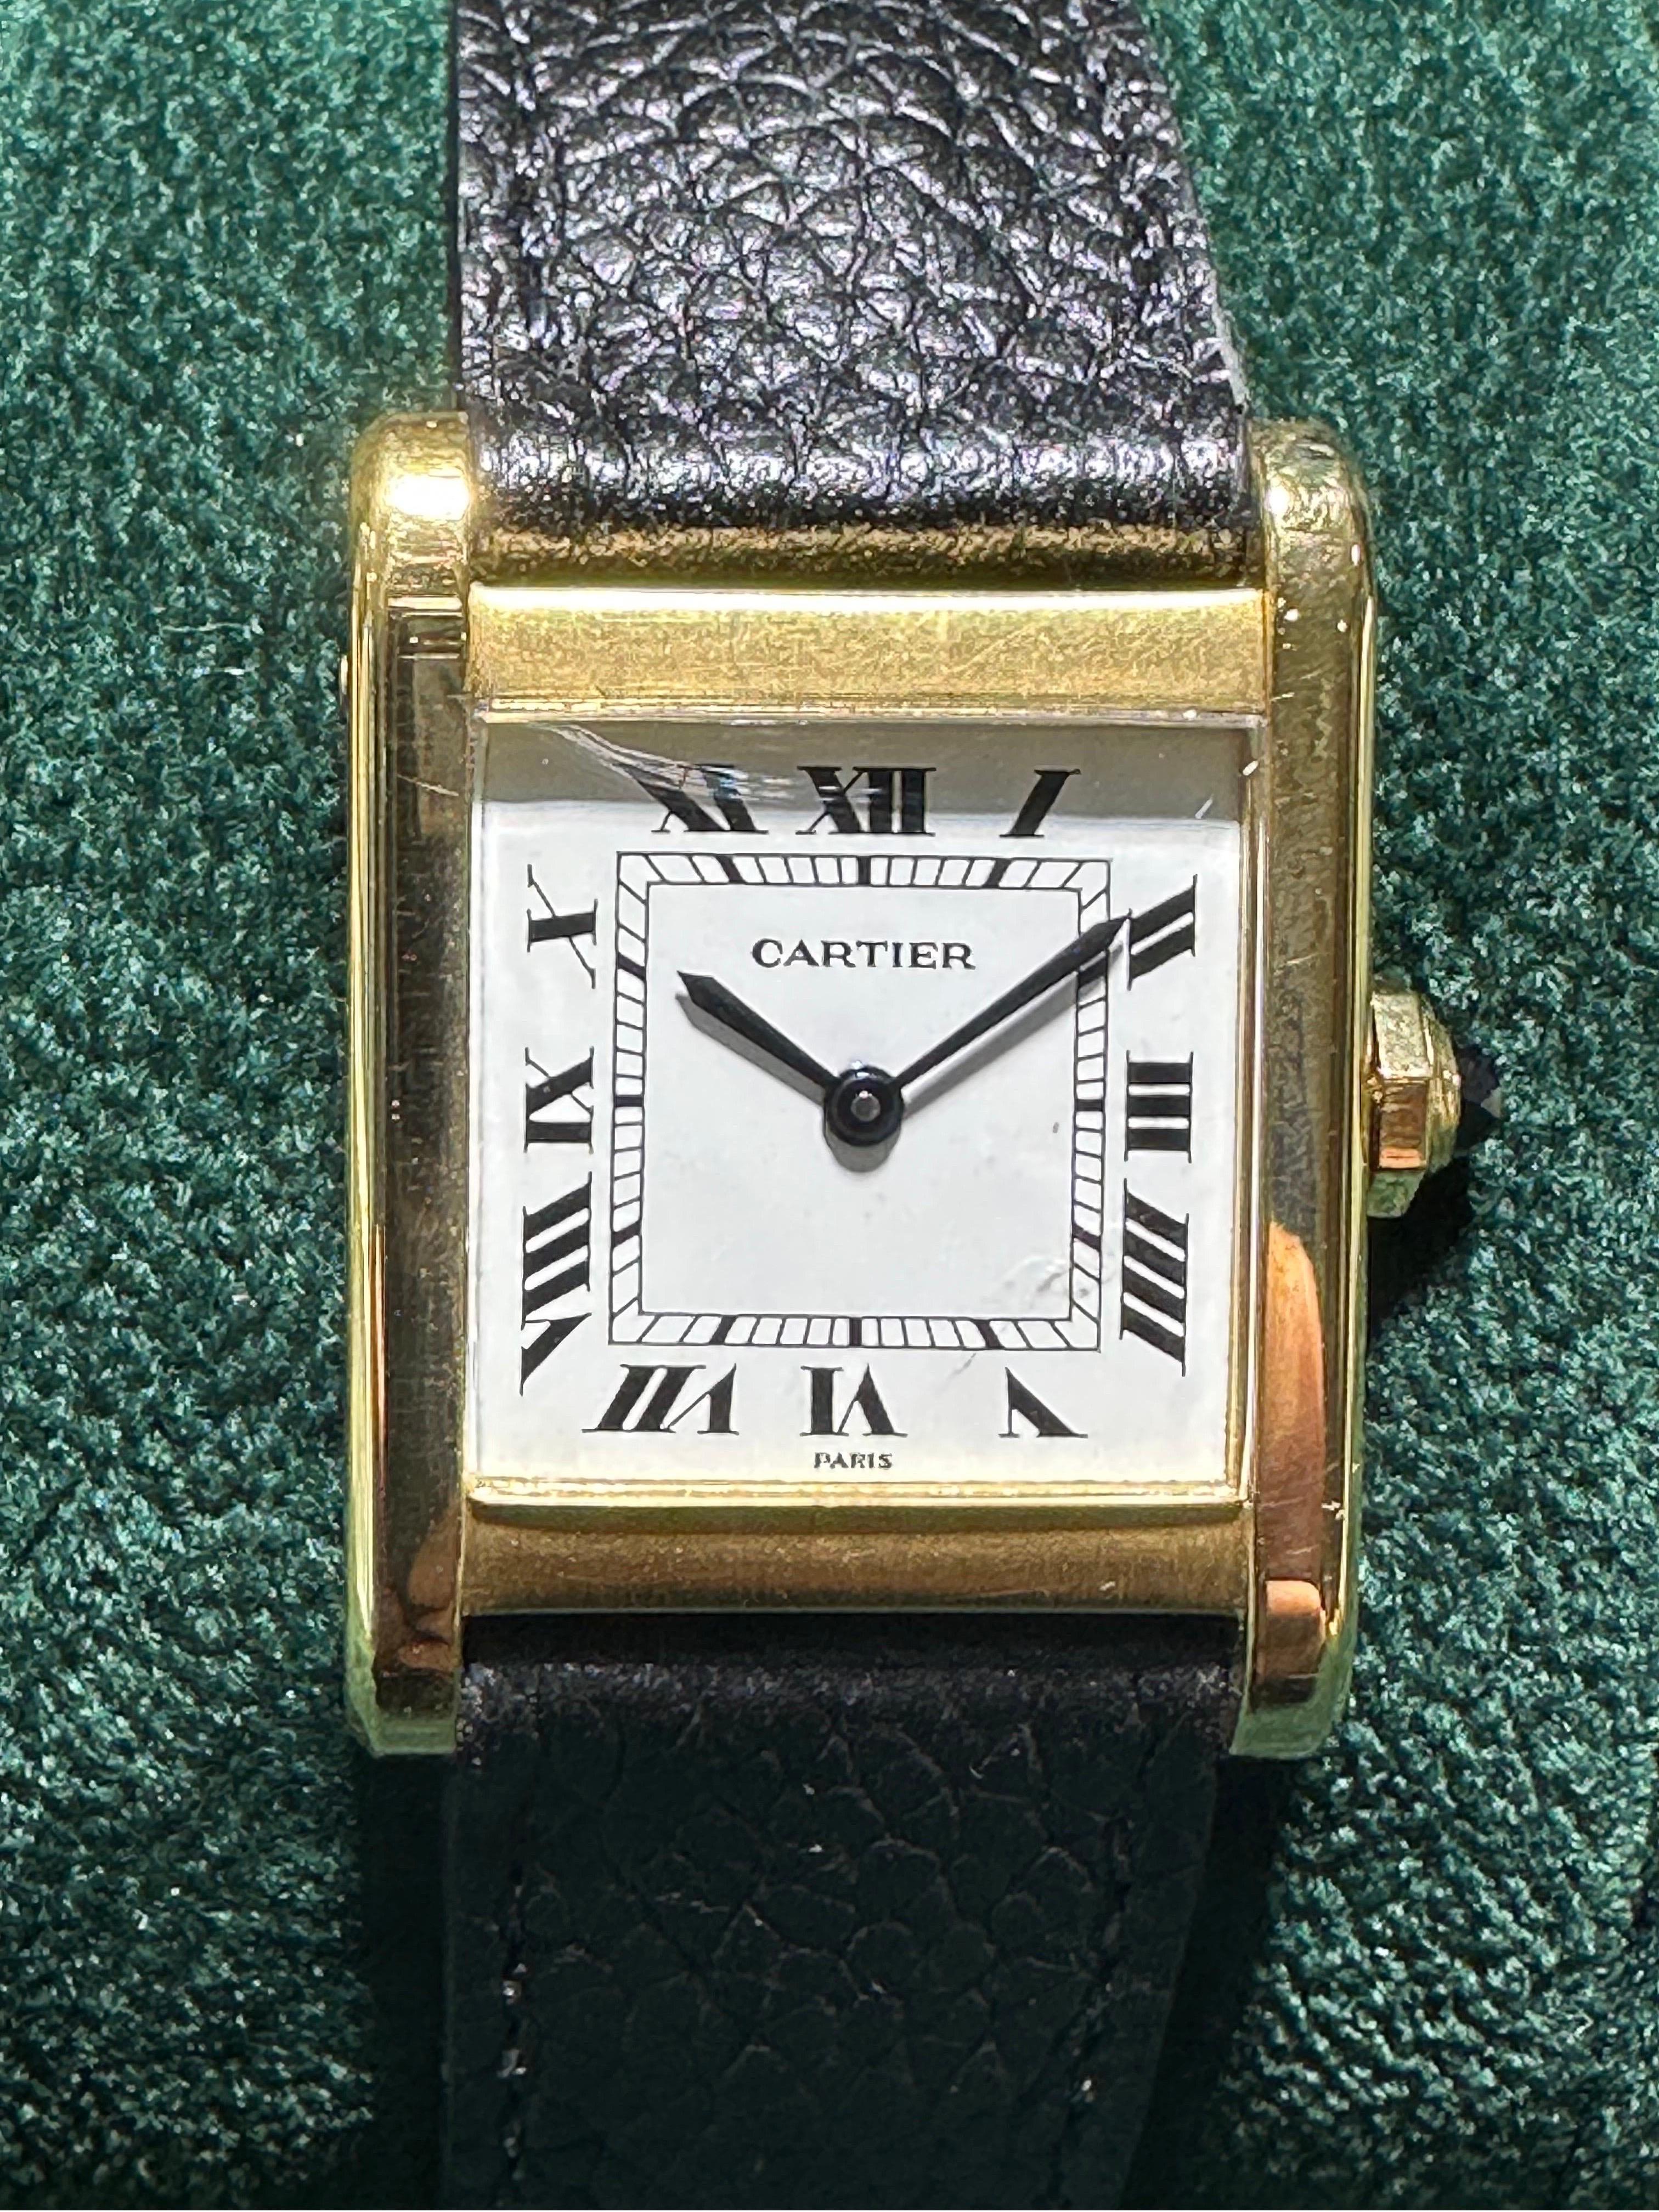 The Cartier Tank Normale was reintroduced in the 1973. In 1973, 12 models were commercialized within the new Louis Cartier collection (Ceinture, Square, Ellipse, Santos, Baignoire, Vendôme, Cristallor, Gondole, Fabergé, Coussin, Tank Normale and